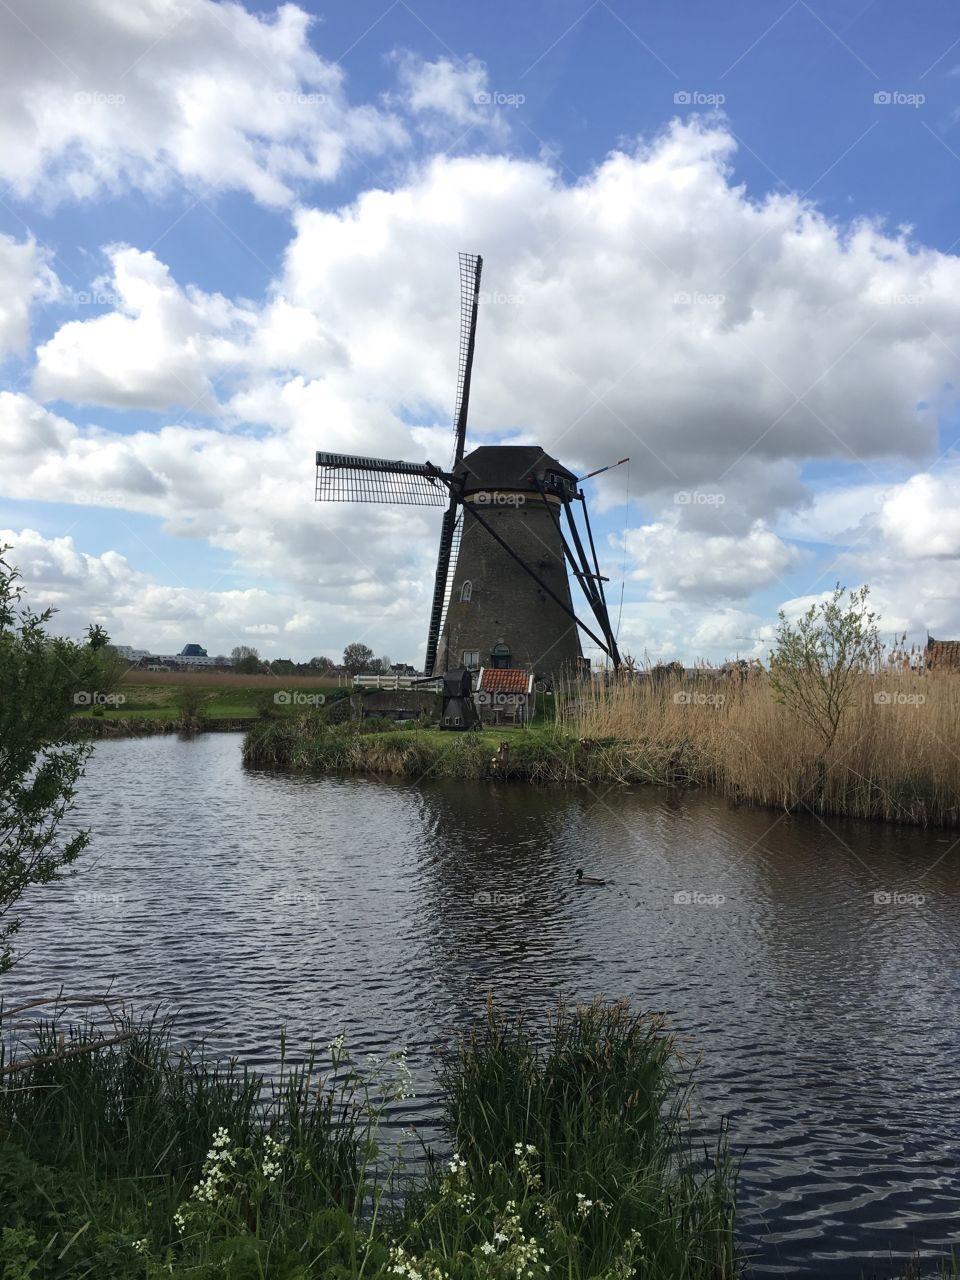 Got to see the windmills in Kinderdijk! It was a beautiful place. 